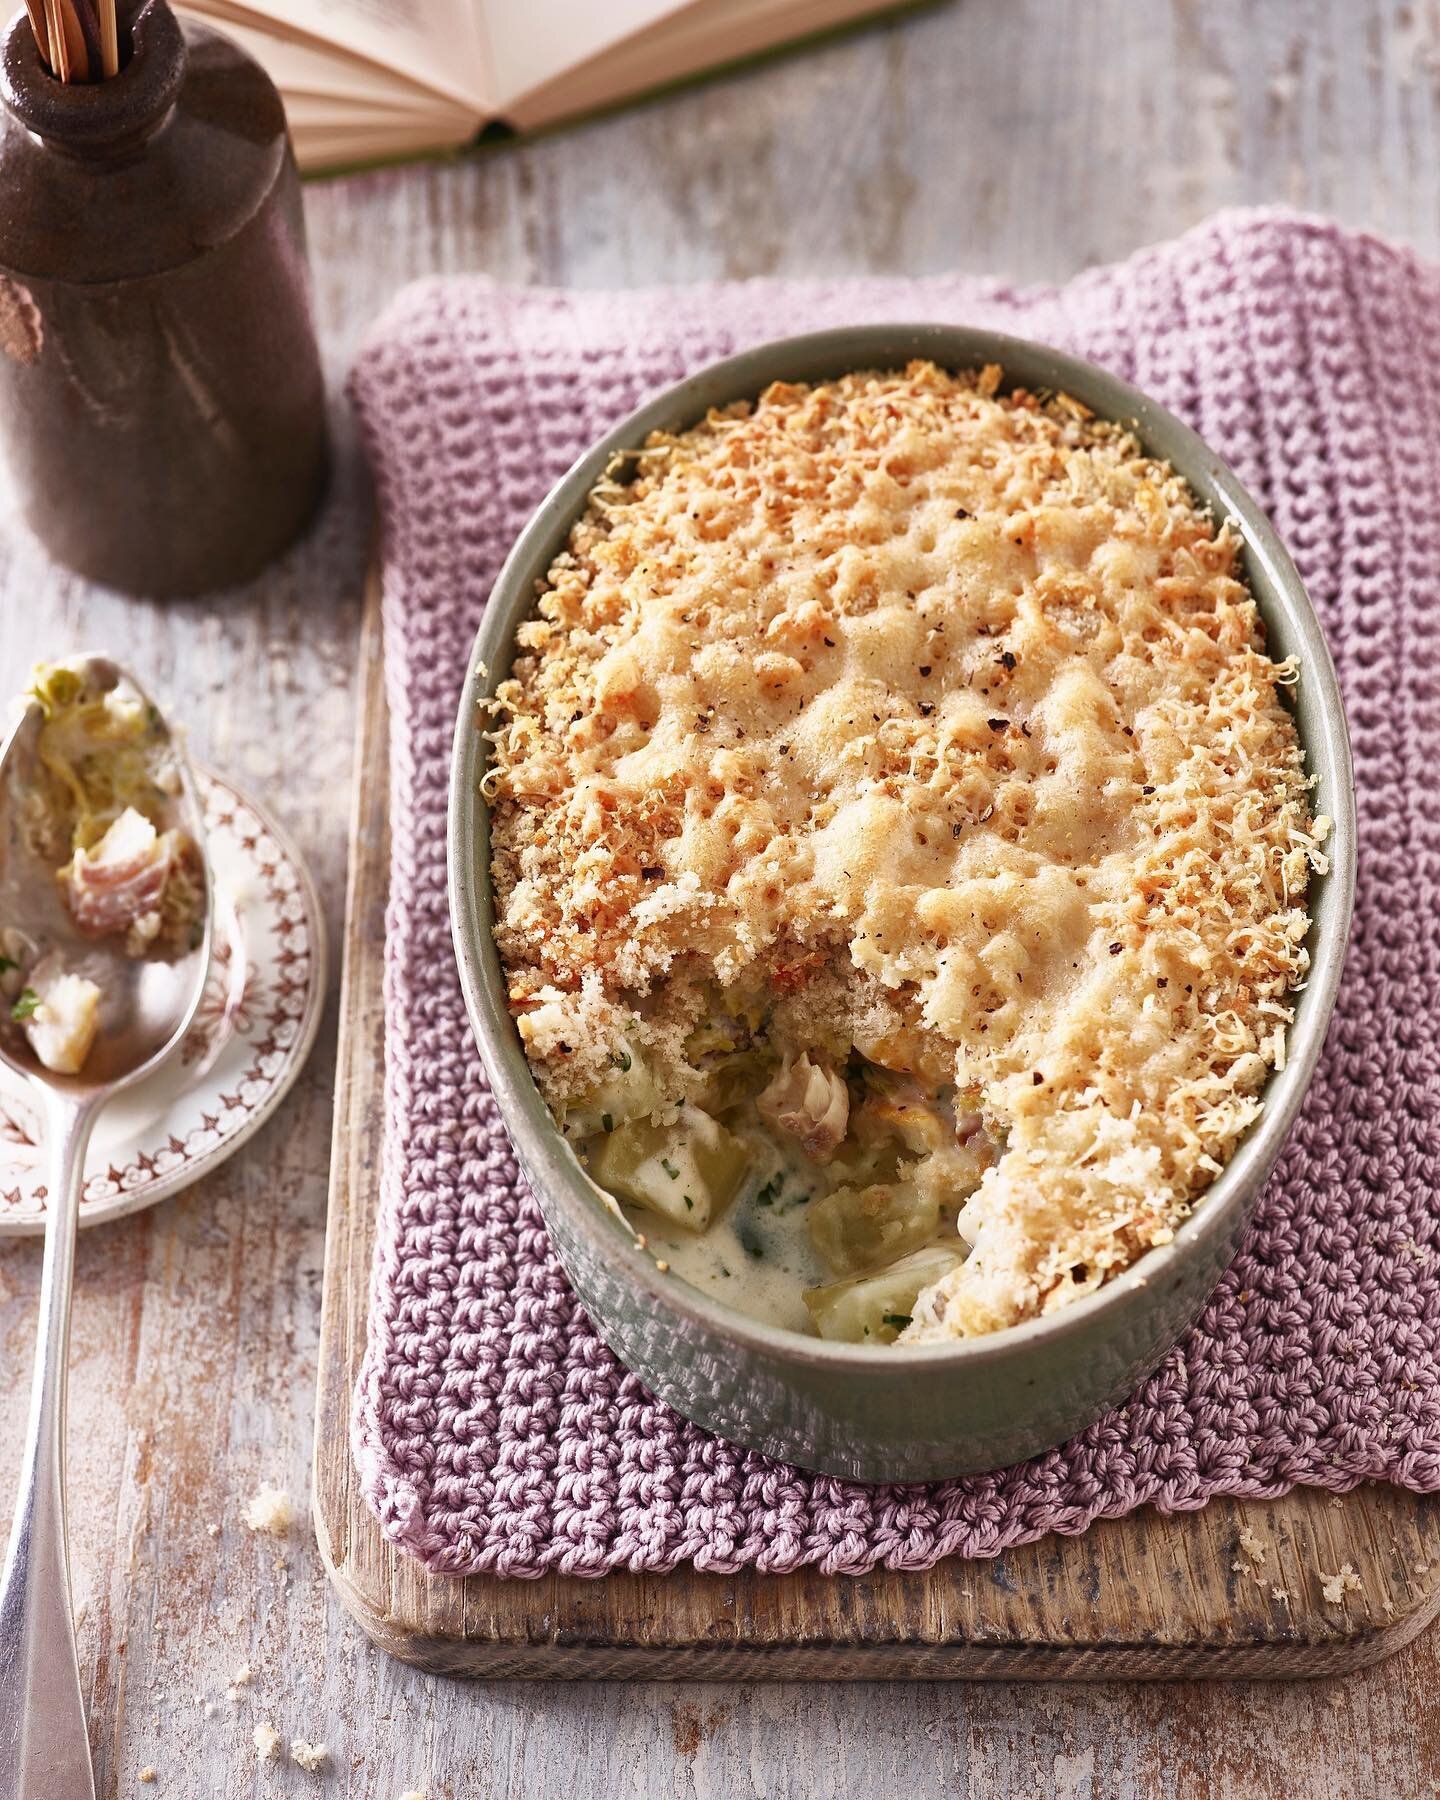 Smoked haddock, savoy cabbage and potato bake is a really tasty twist on fish pie with the potatoes at the bottom. When we first made it for our neighbours we immediately had requests for &lsquo;more please&rsquo; and &lsquo;bake it again!&rsquo;

Al